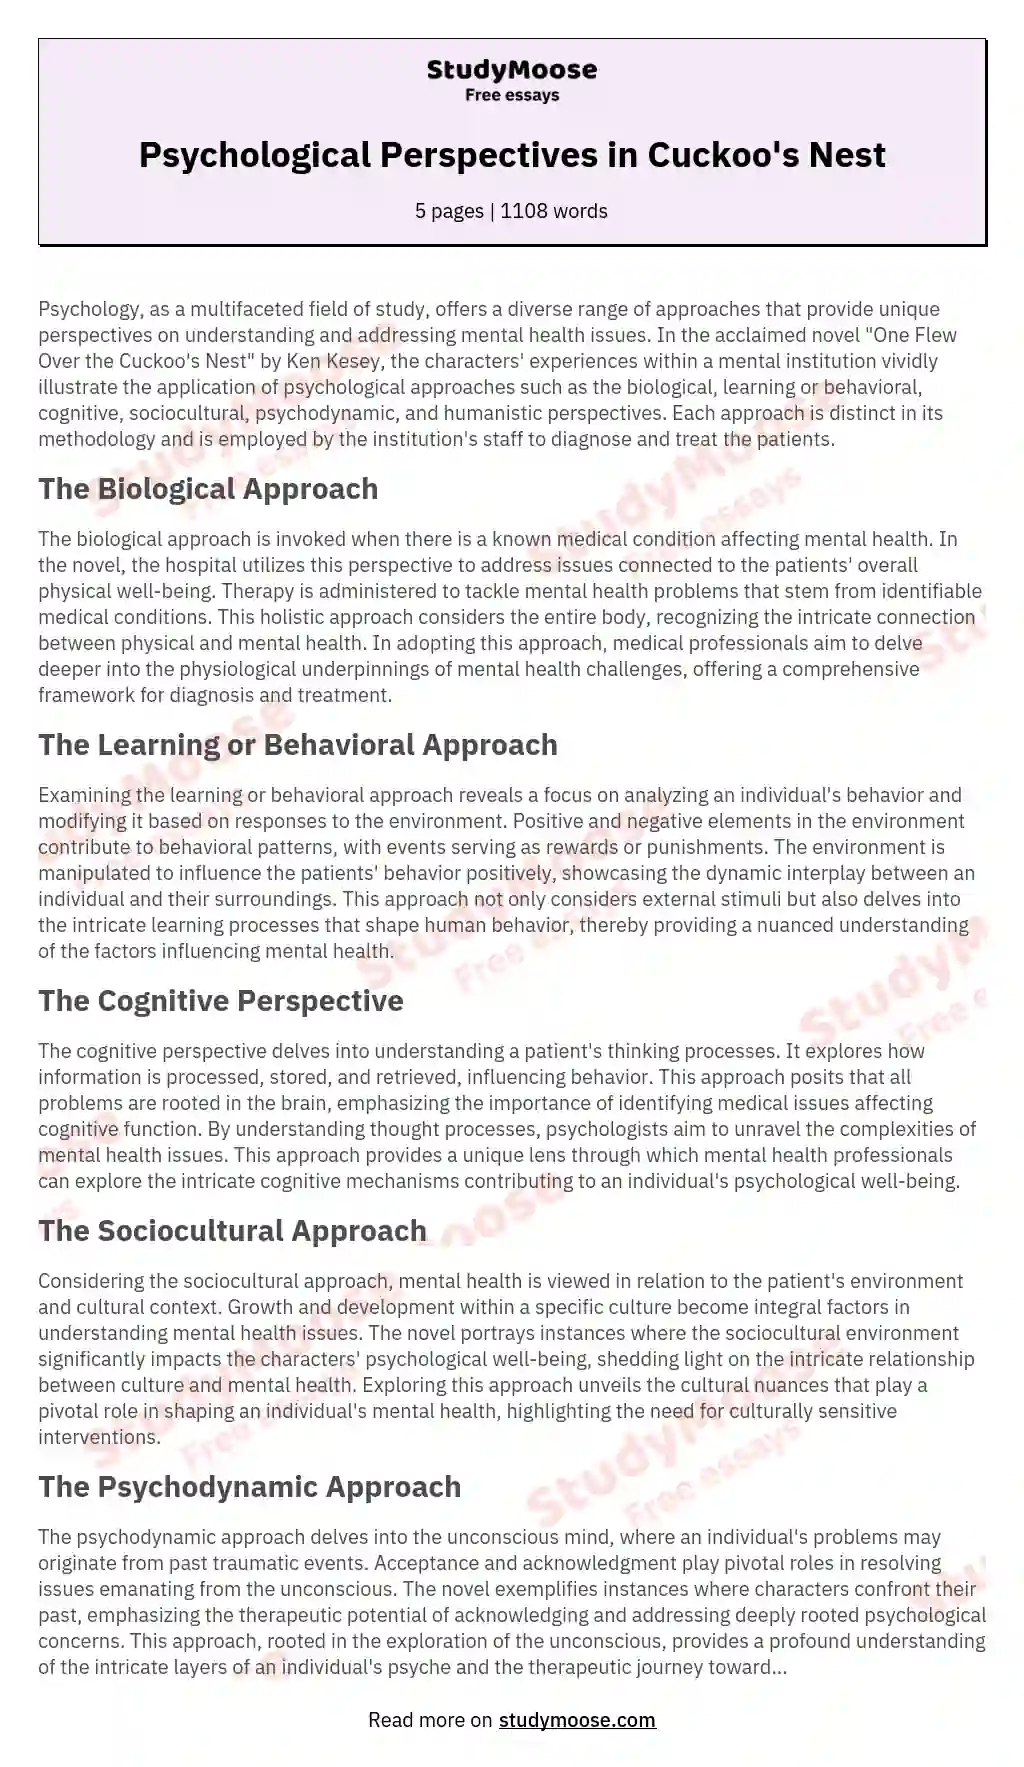 The Psychological Approaches Free Essay Example